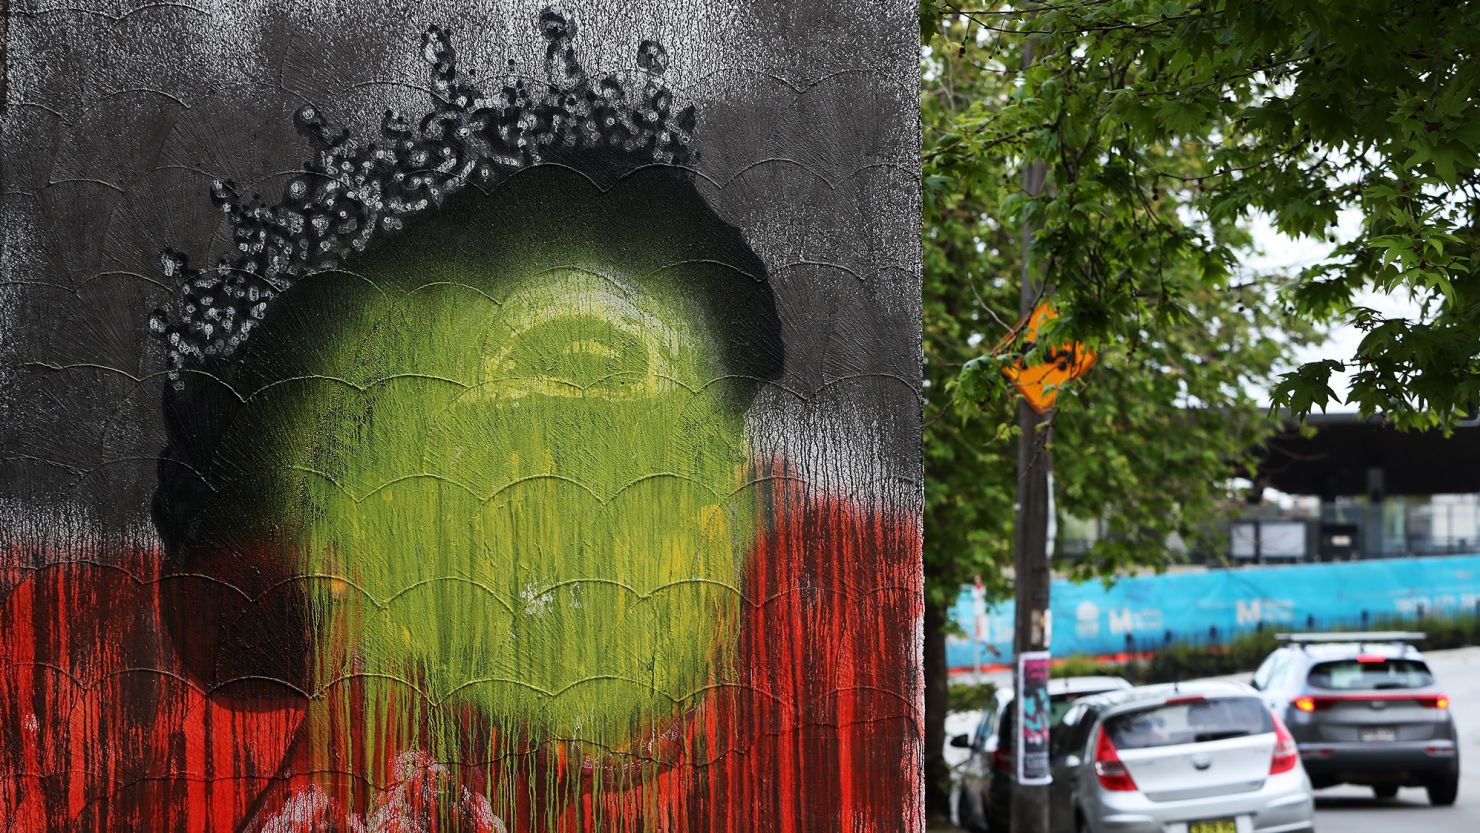 SYDNEY, AUSTRALIA - SEPTEMBER 22: A mural of the late Queen Elizabeth II by artist Stuart Sale has been painted over with the colours of the Aboriginal flag in Marrickville Thursday 22 September was declared a one-off public holiday as a National Day of Mourning for Australia following Queen Elizabeth II's death. (Photo by Lisa Maree Williams/Getty Images)